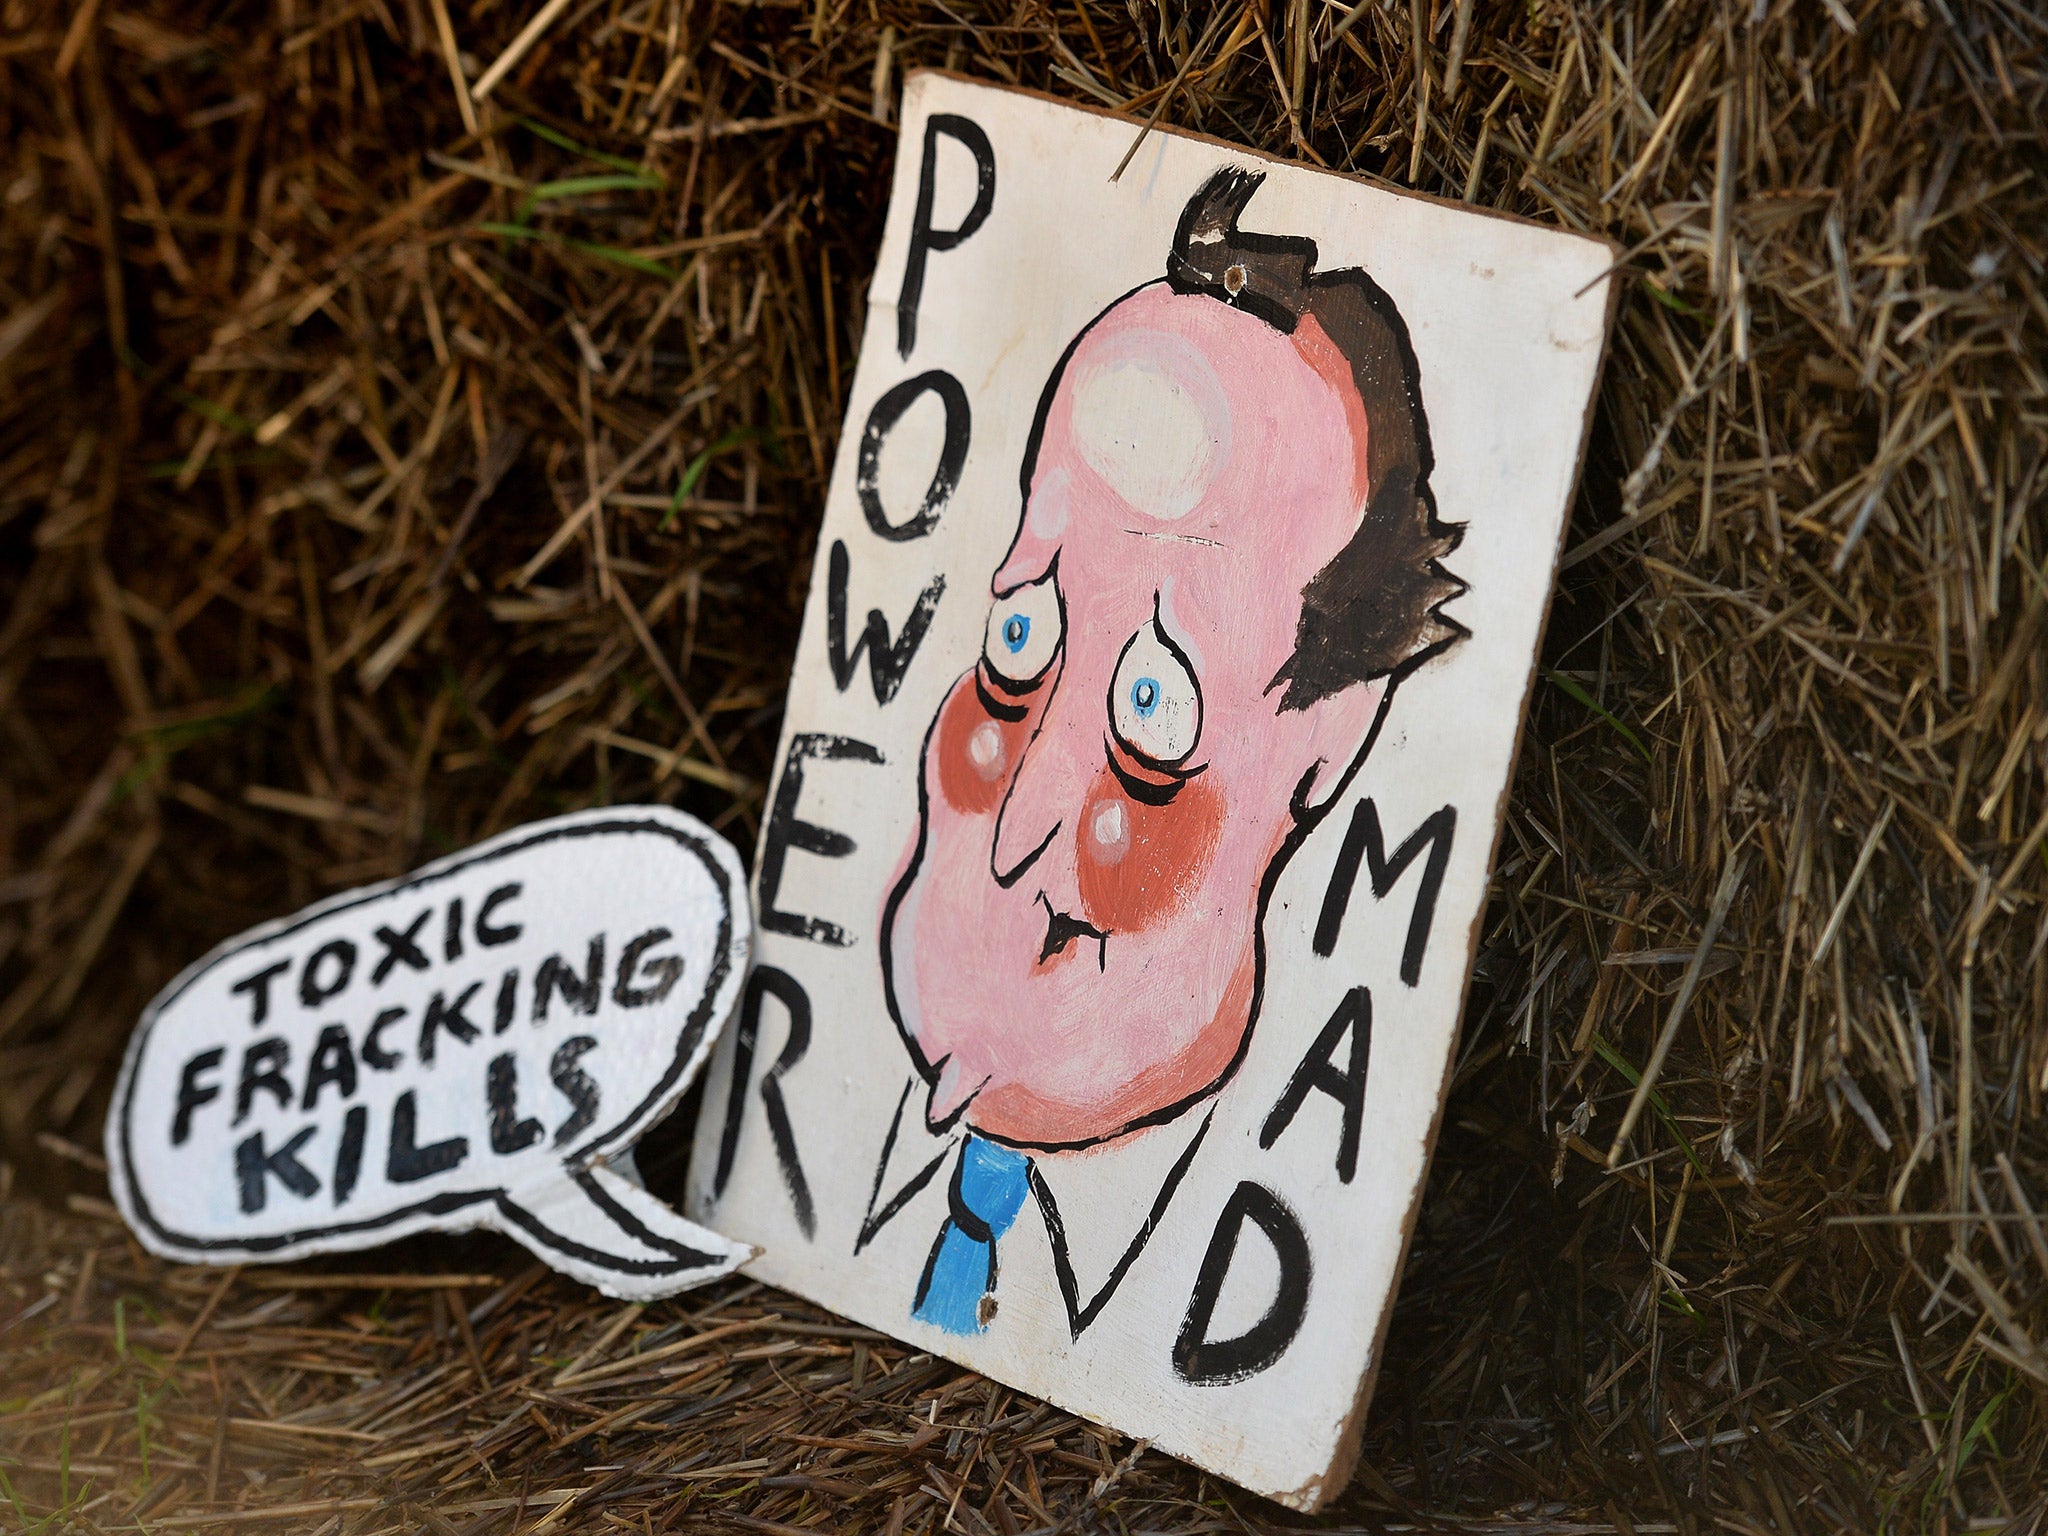 A placard depicting David Cameron at anti-fracking protest in Balcombe last year